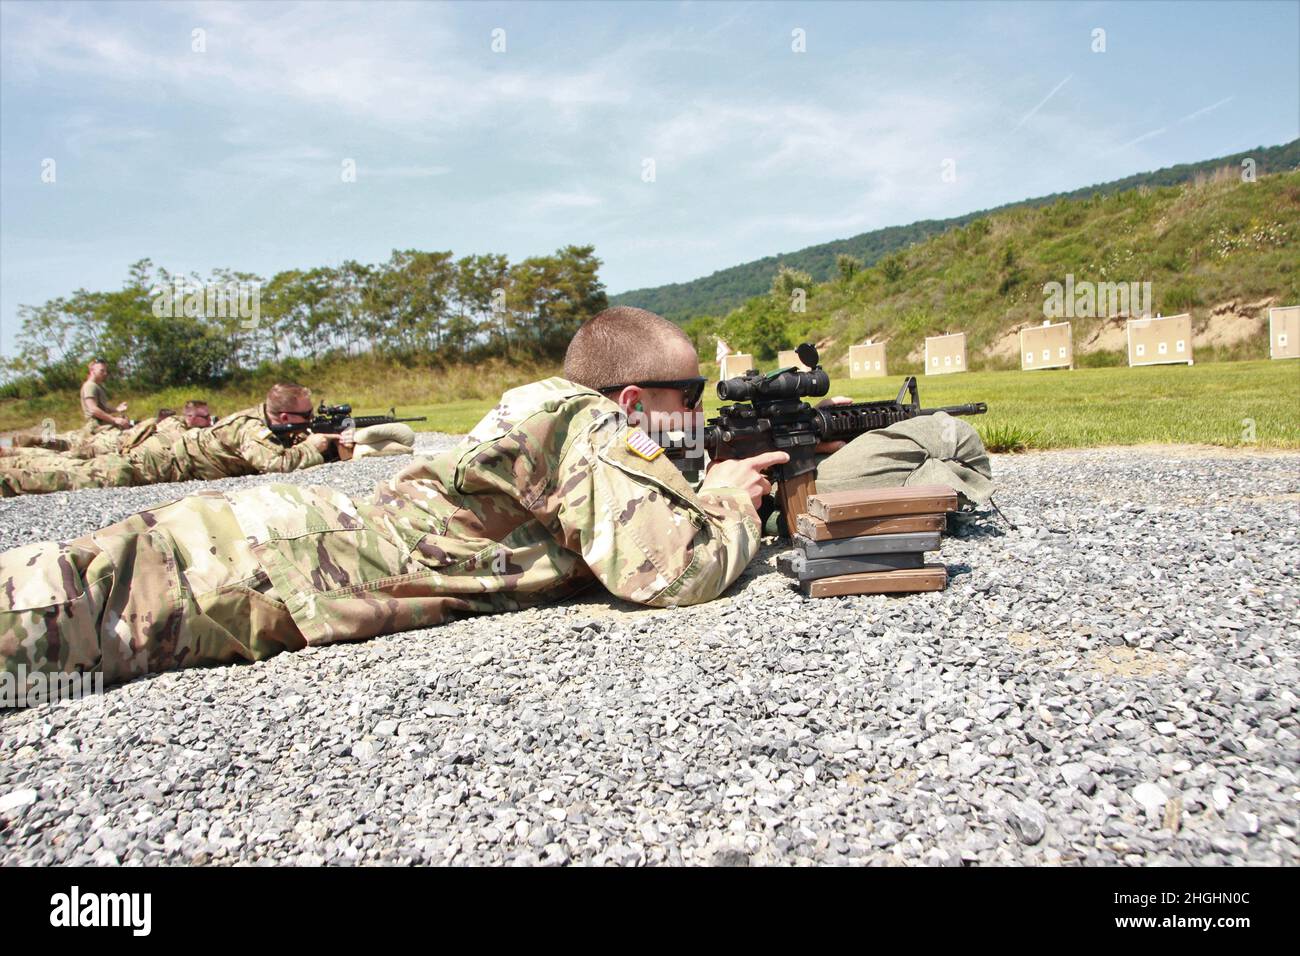 Members of the 109th Infantry Battalion, 28th Infantry Division, trained on ranges at Fort Indiantown Gap, Pennsylvania, August 6, in preparation for a mission in Egypt in the next year. Completing basic rifle qualification with the M4 is one of the 14 individual tasks and 4 collective tasks to complete prior to a mobilization. Stock Photo